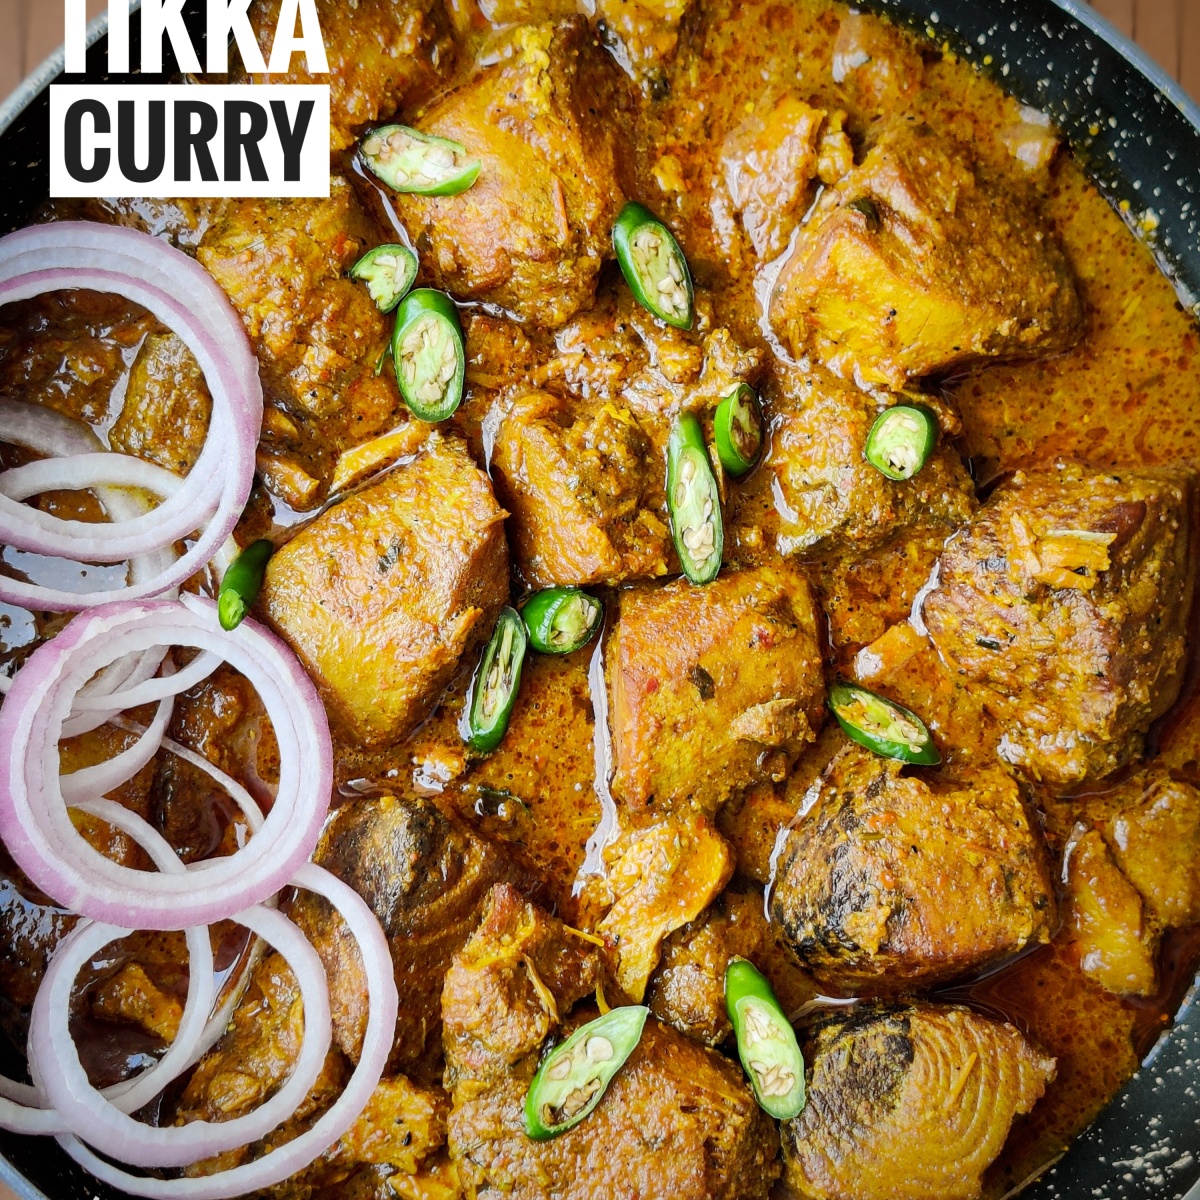 Kingfish Tikka Curry (without Coconut milk)